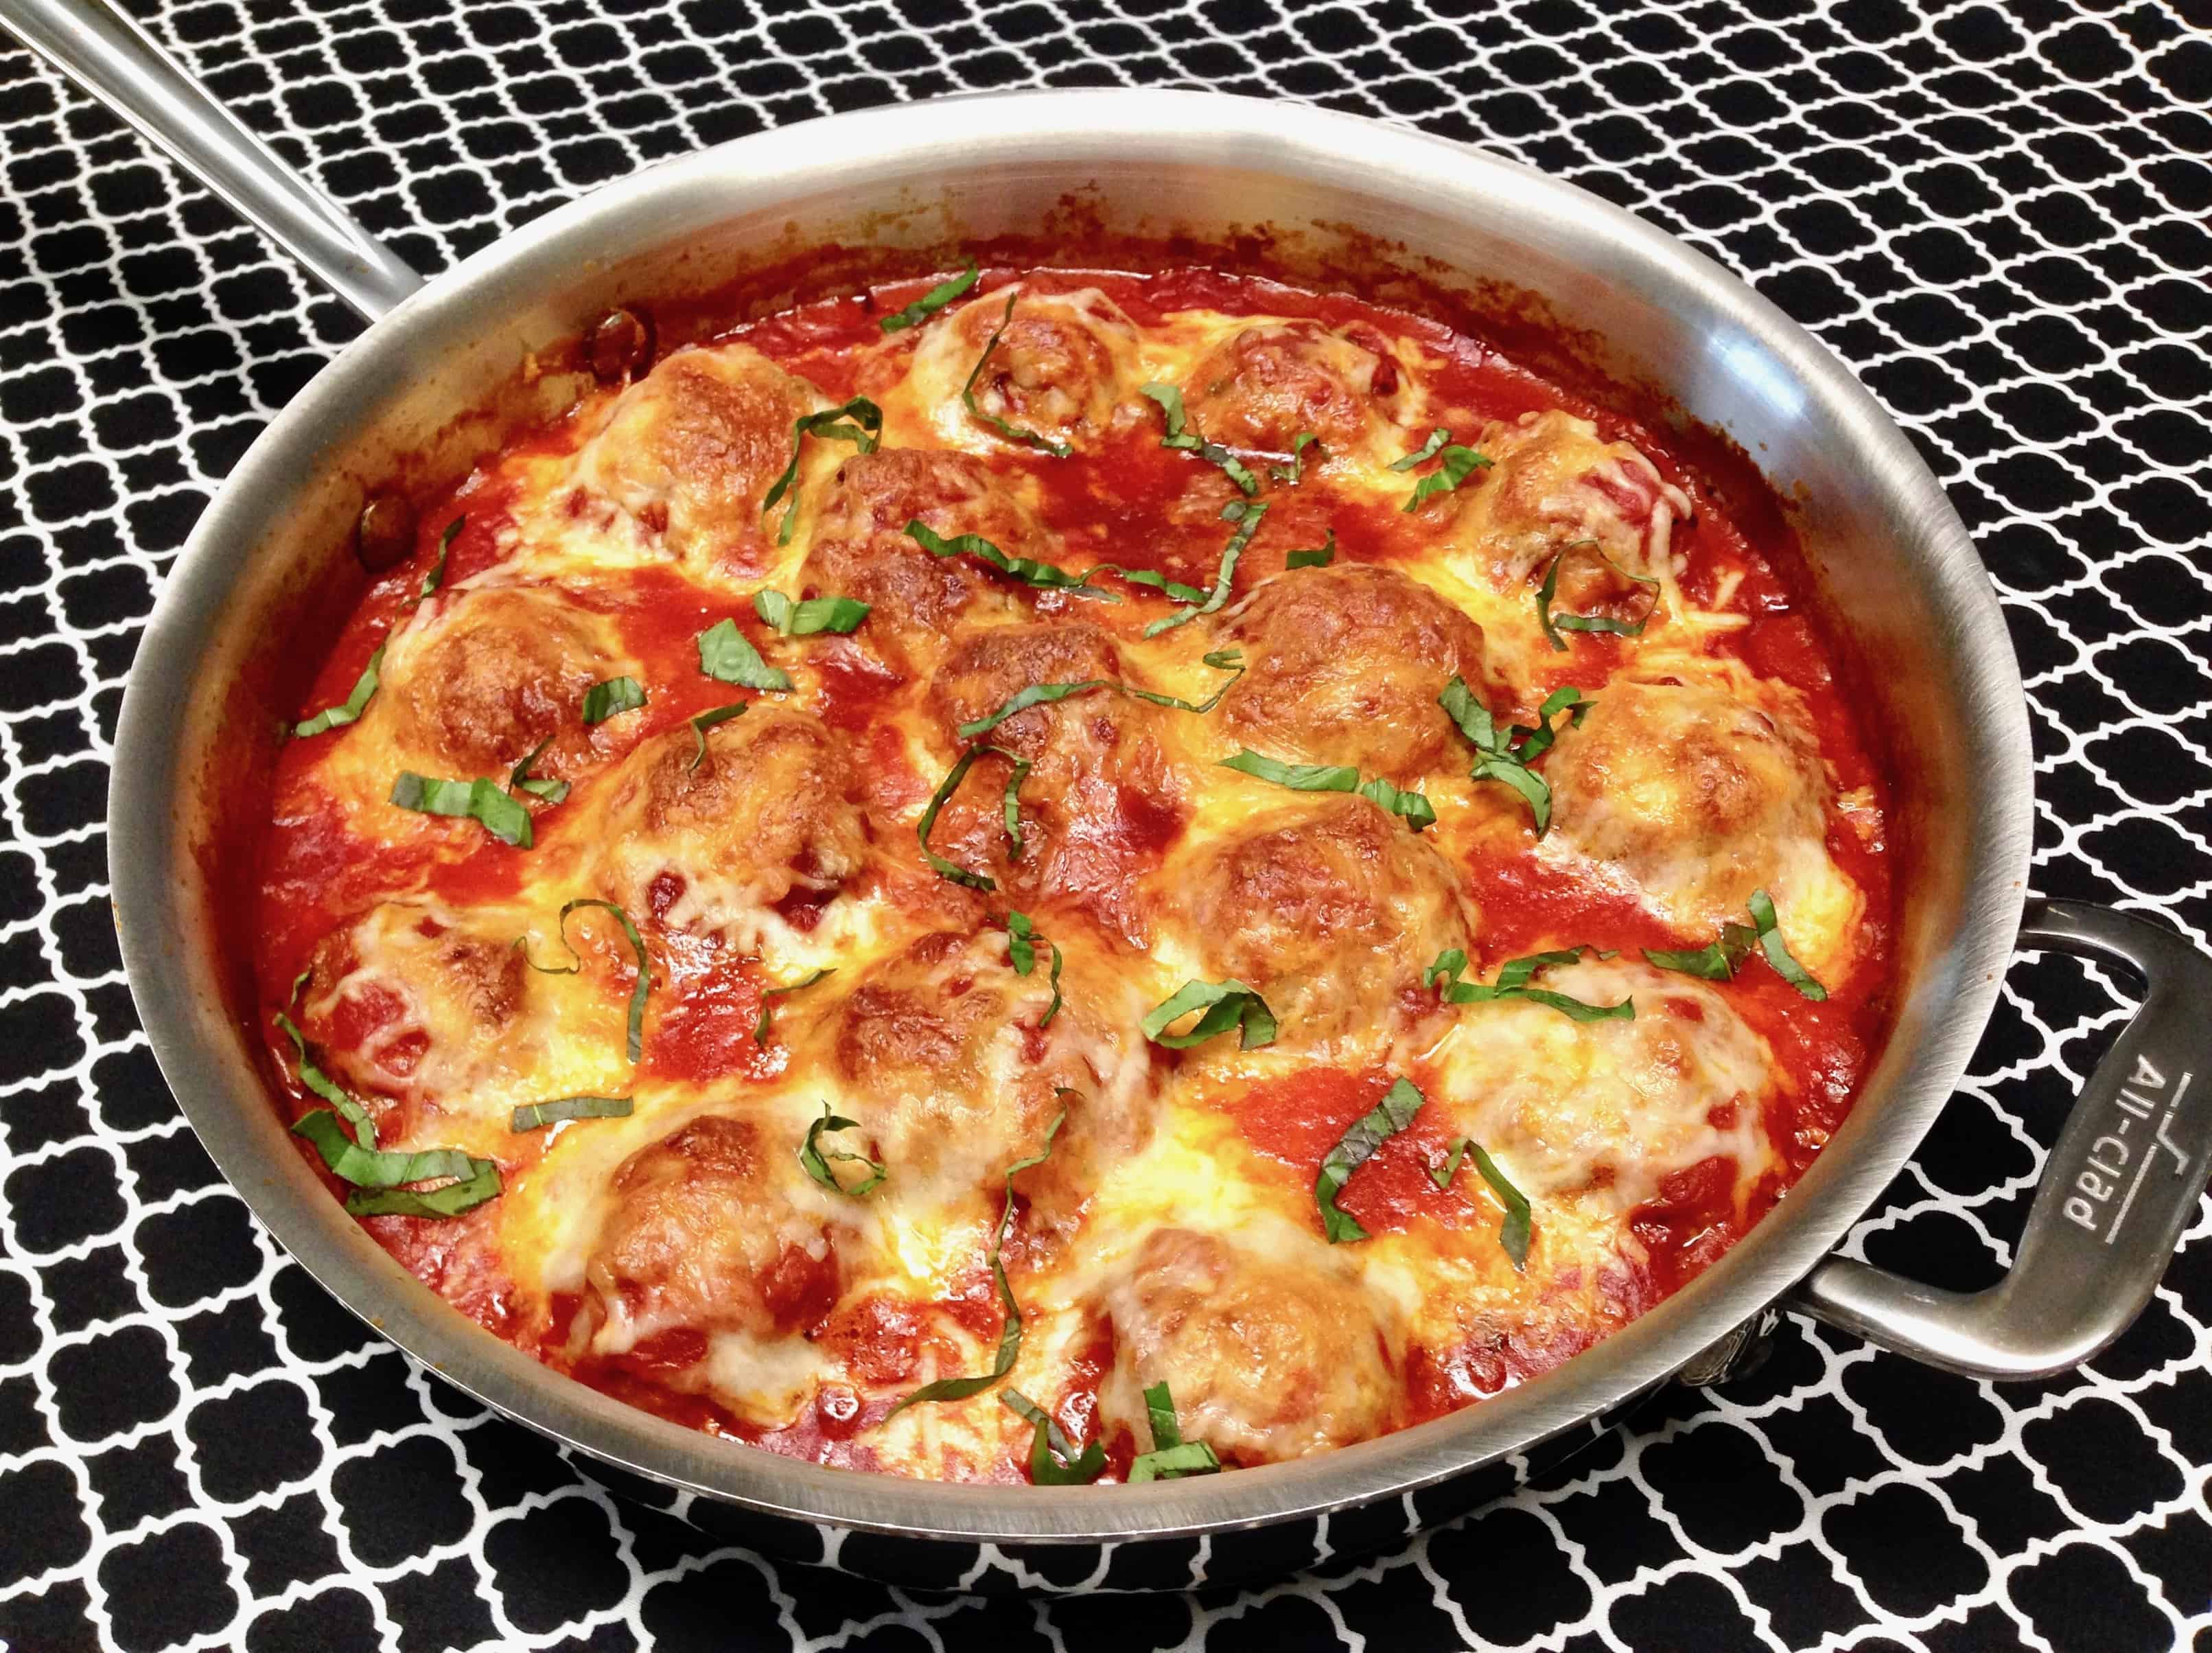 skillet with baked meatballs in sauce with basil garnish